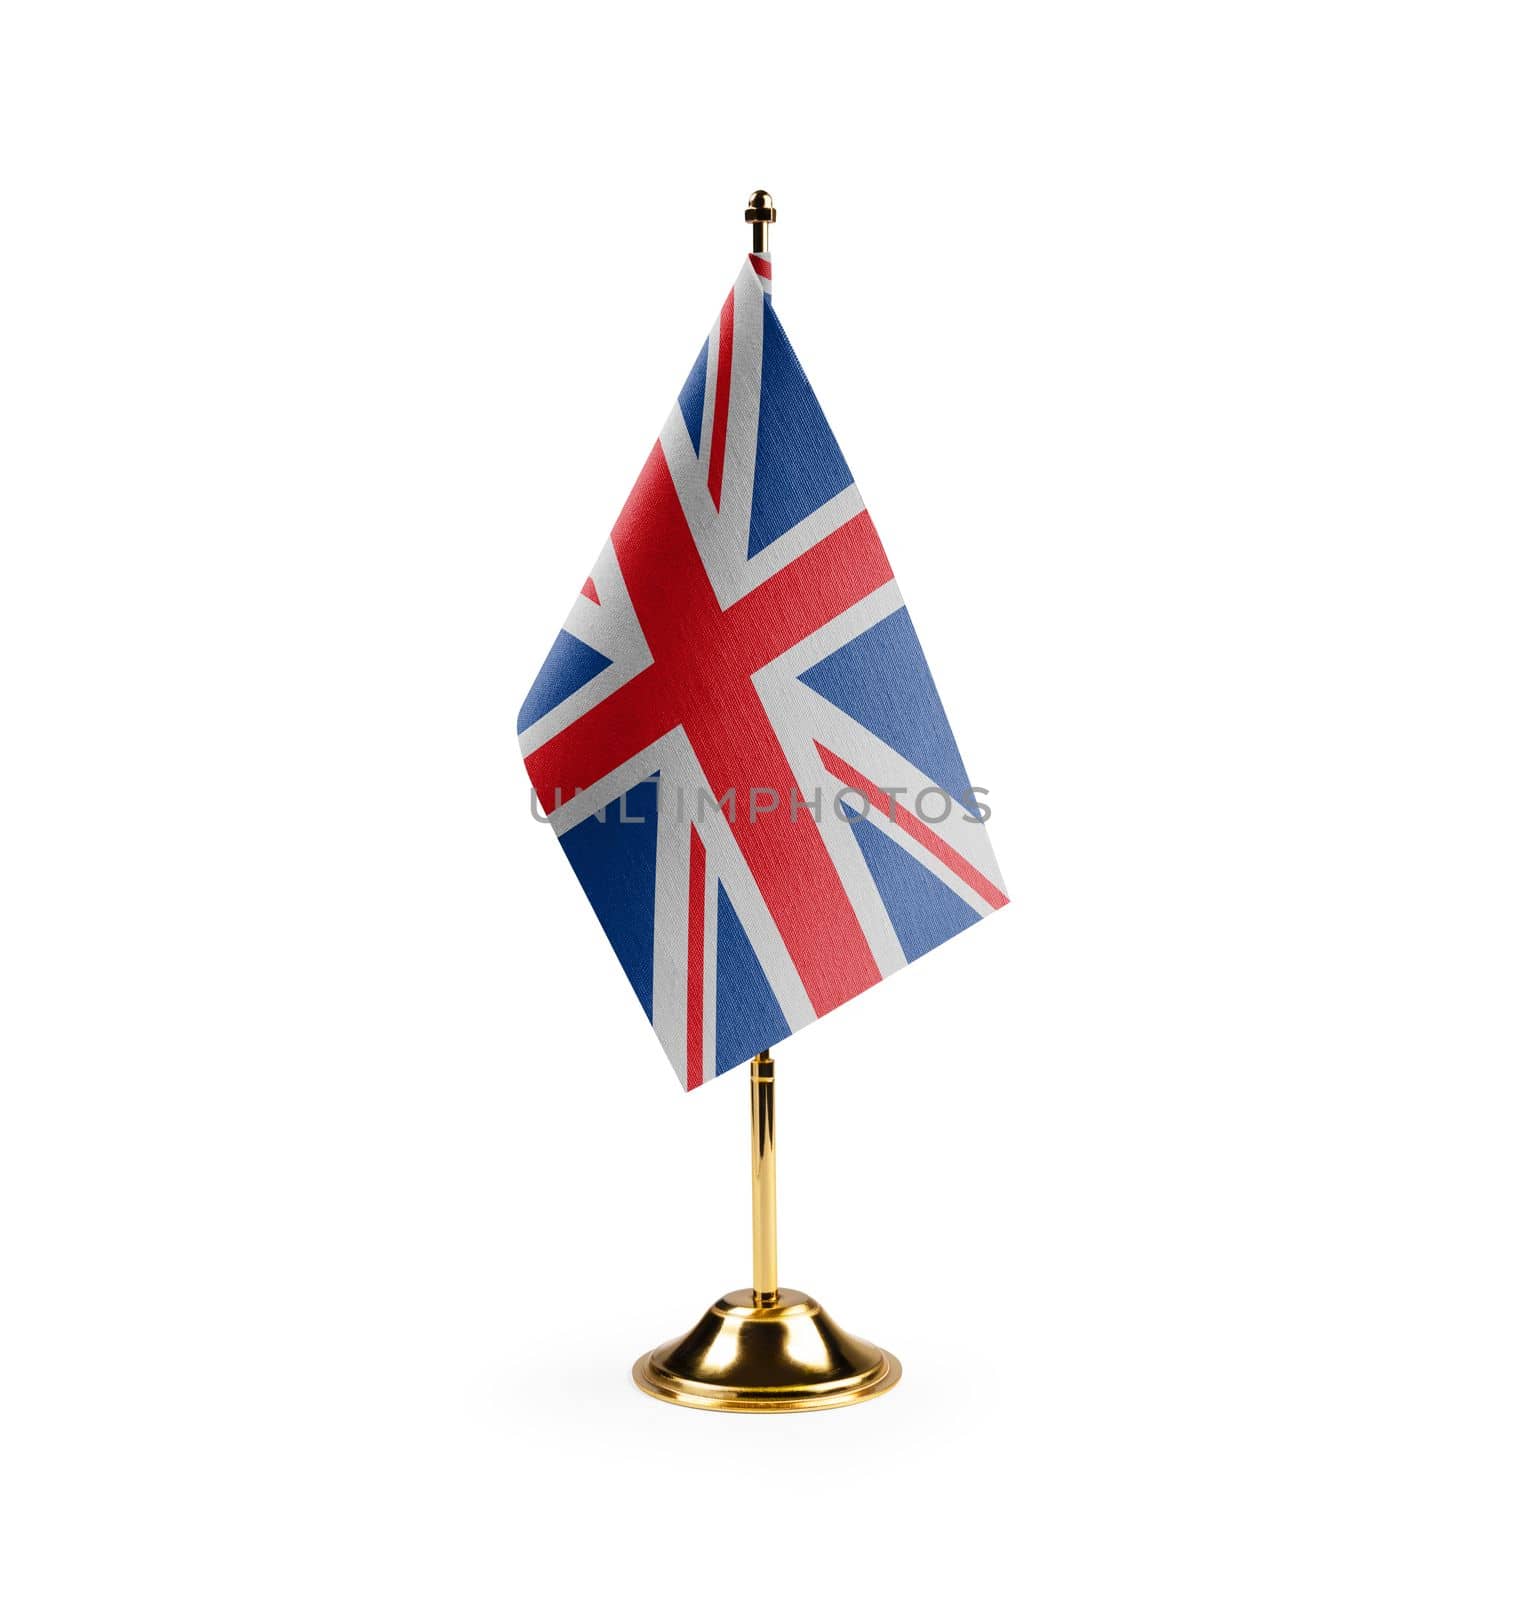 Small national flag of the United Kingdom on a white background.